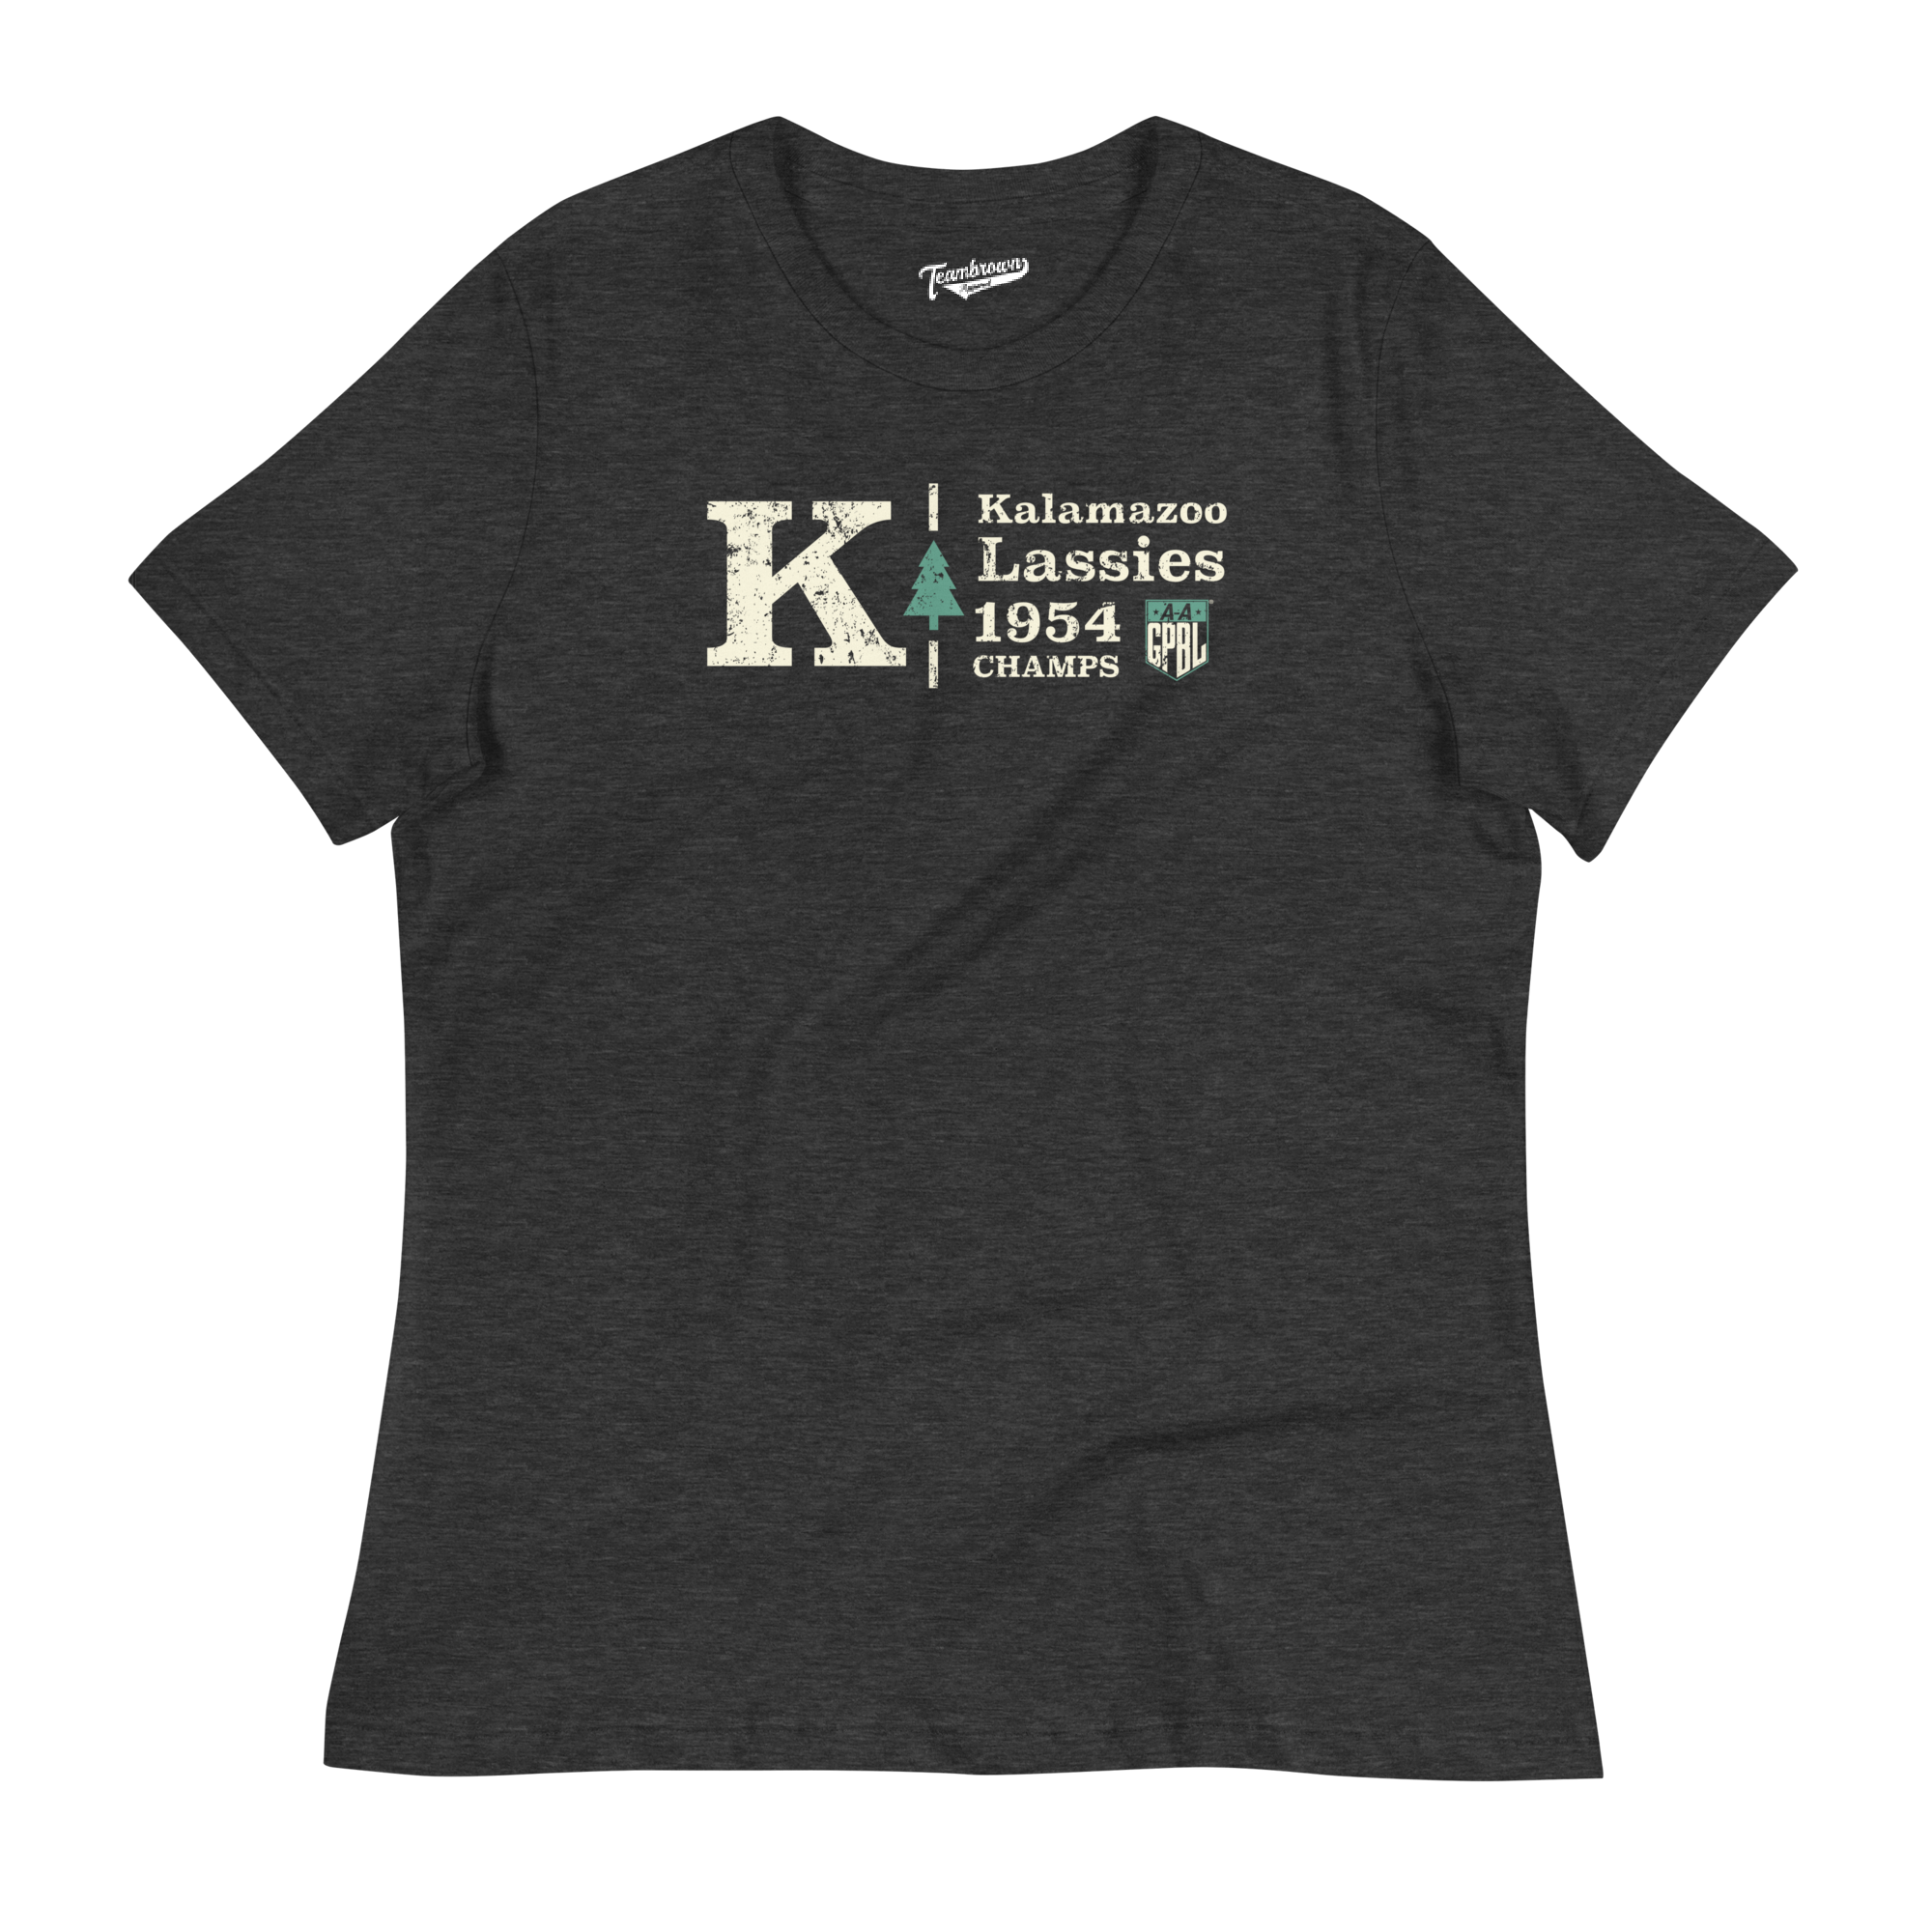 Kalamazoo Lassies Champions - Women's Relaxed Fit T-Shirt | Officially Licensed - AAGPBL